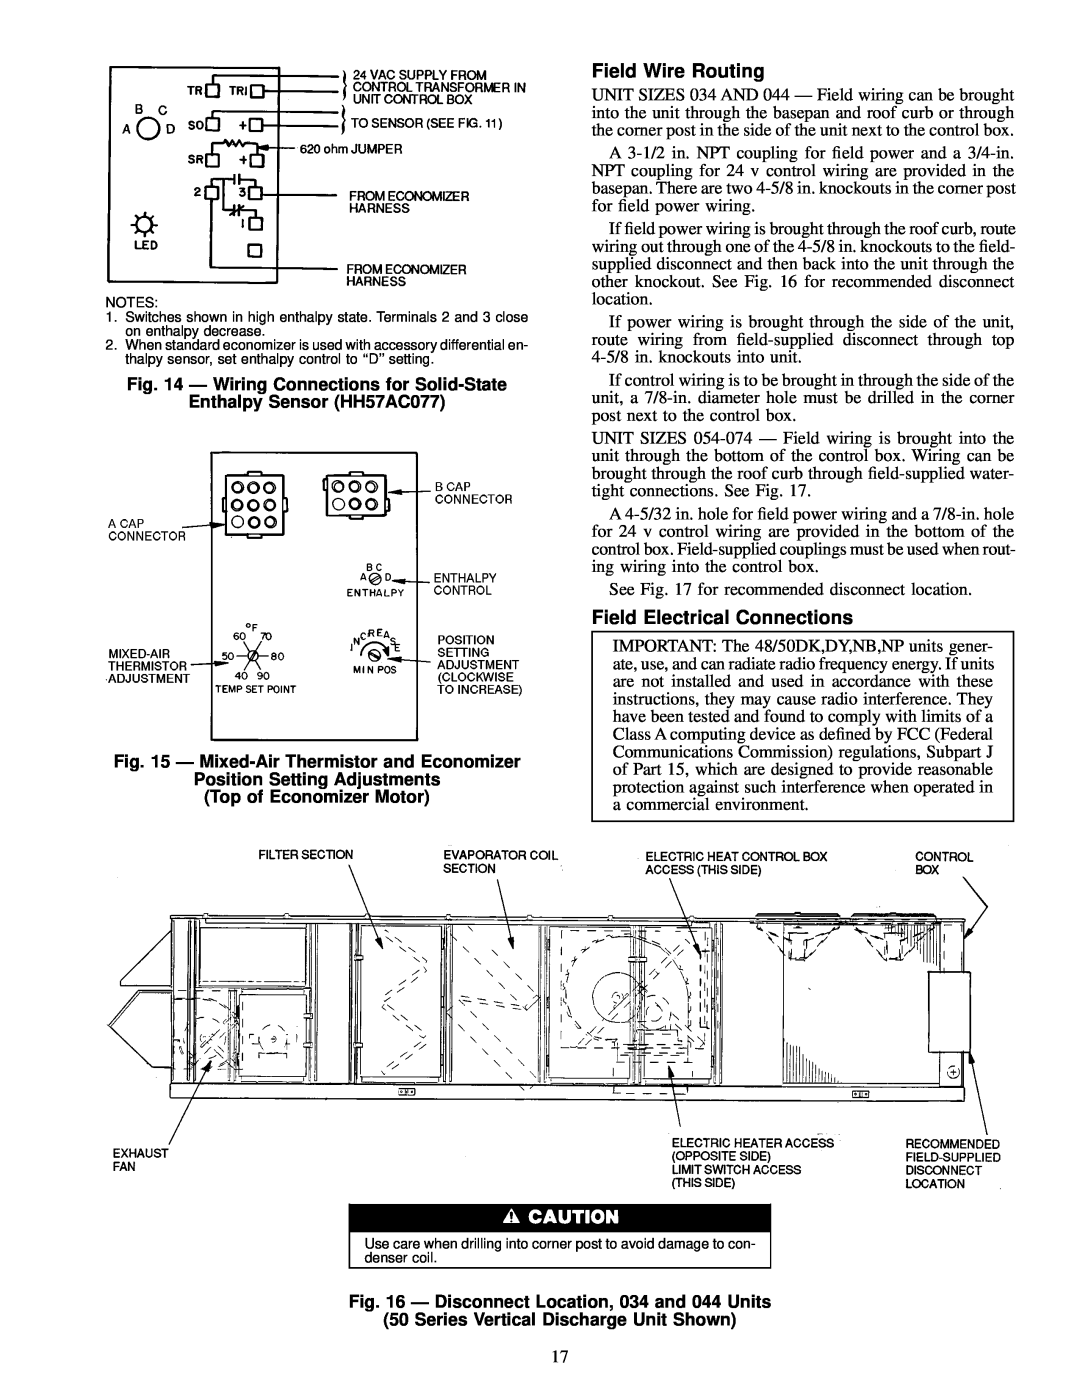 Carrier NP034-074 specifications Field Wire Routing, Field Electrical Connections, Ð Wiring Connections for Solid-State 